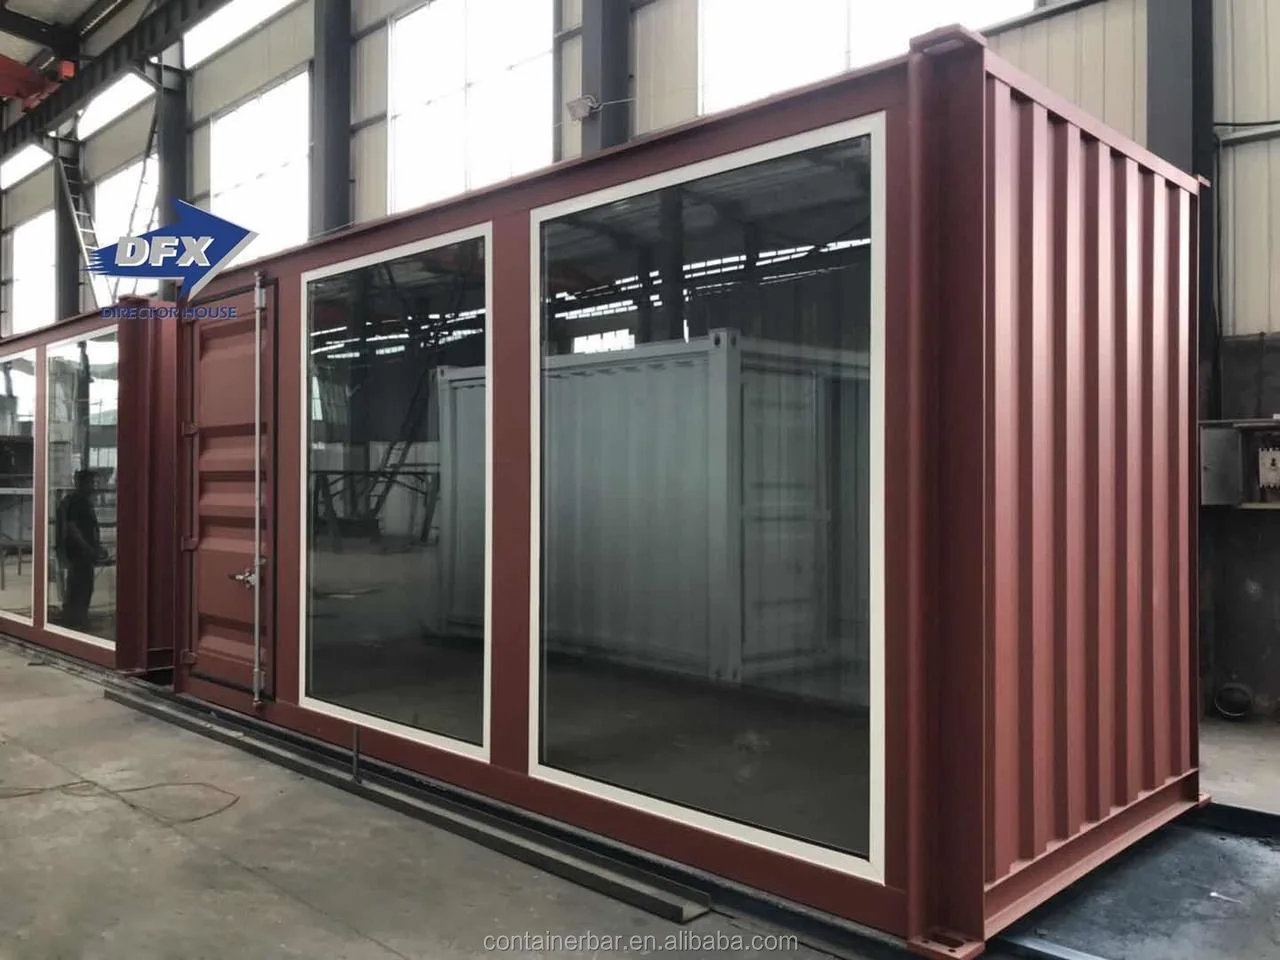 
Factory direct living prefab shipping container house for sale 